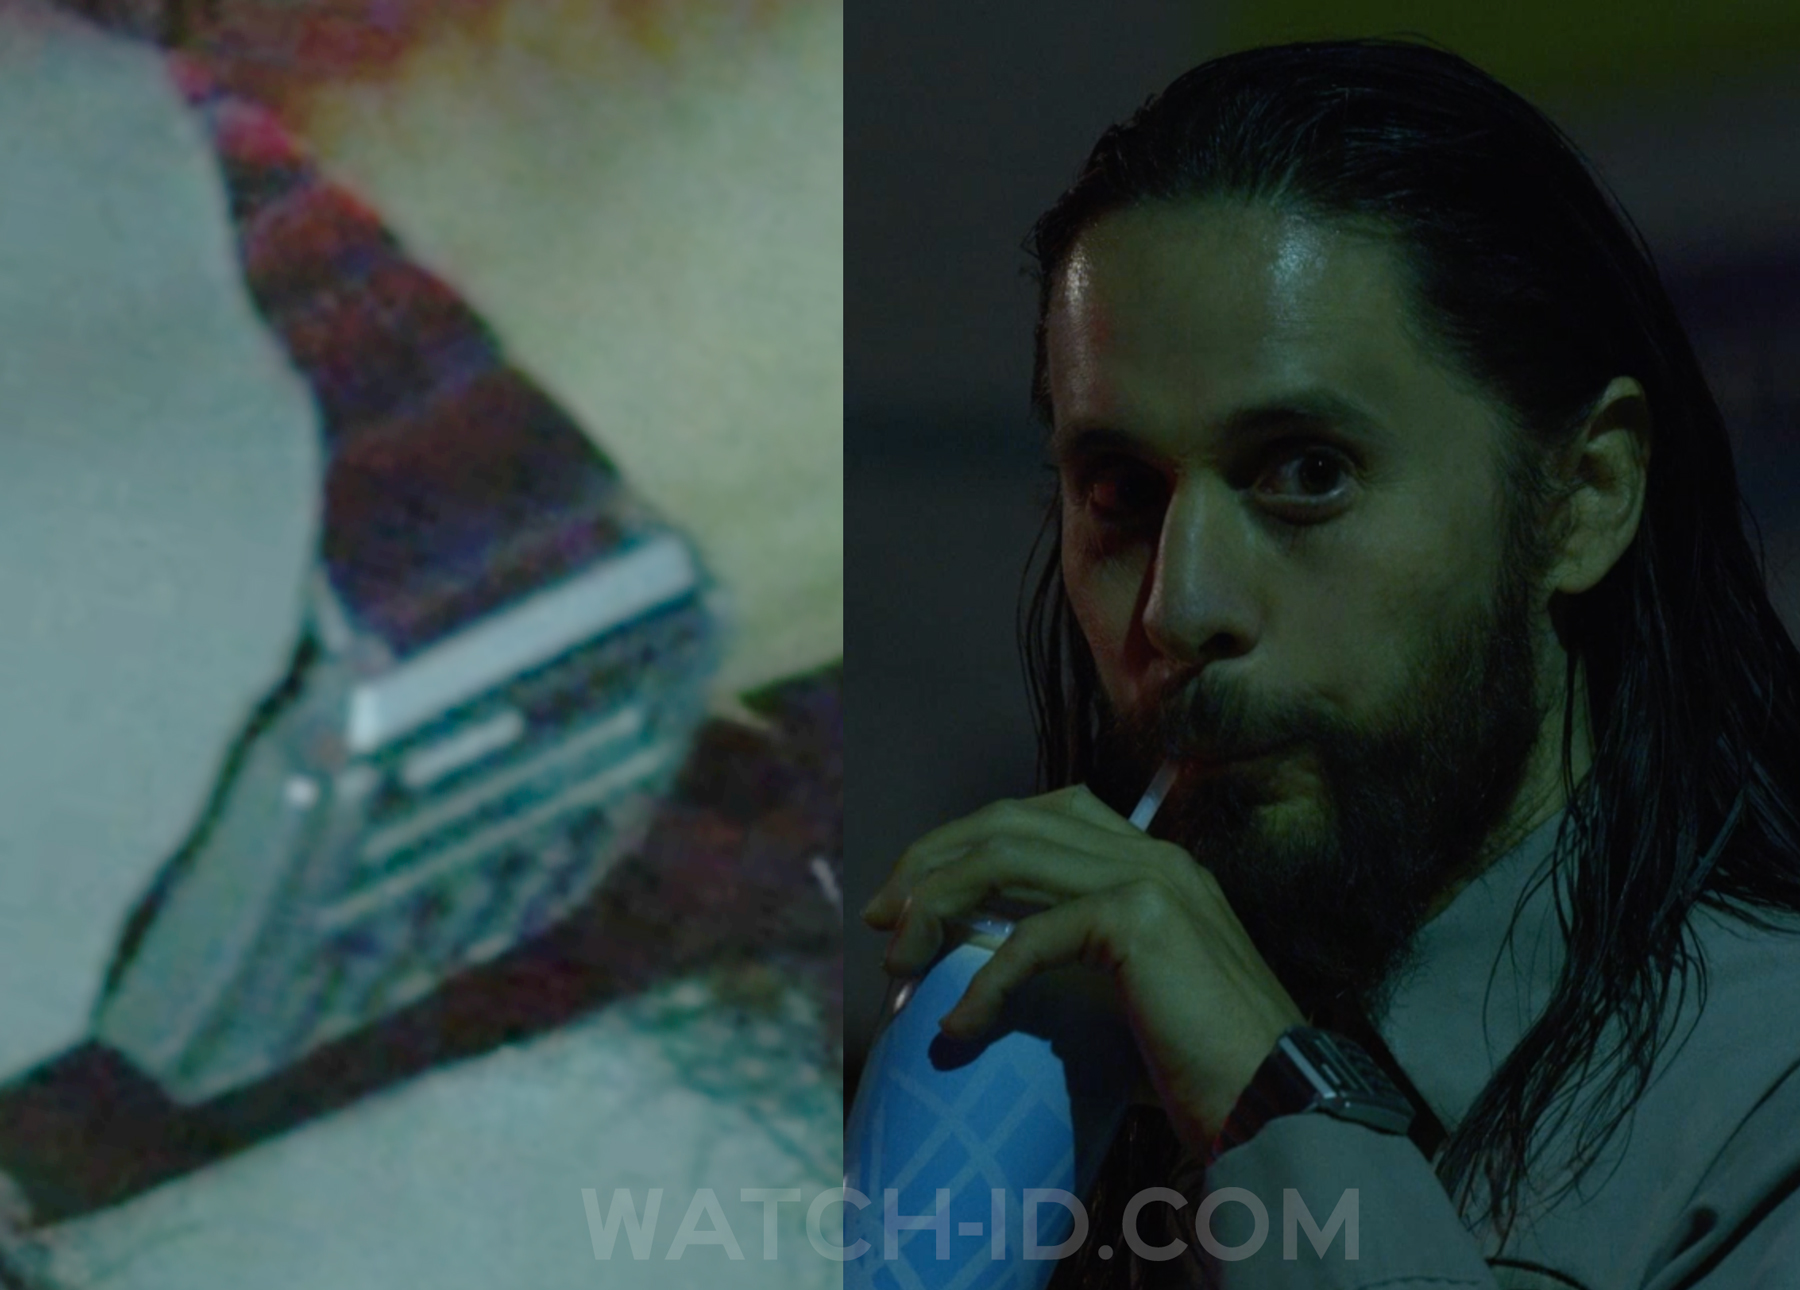 Casio CA-506-1 - Jared Leto - The Little Things | Watch ID